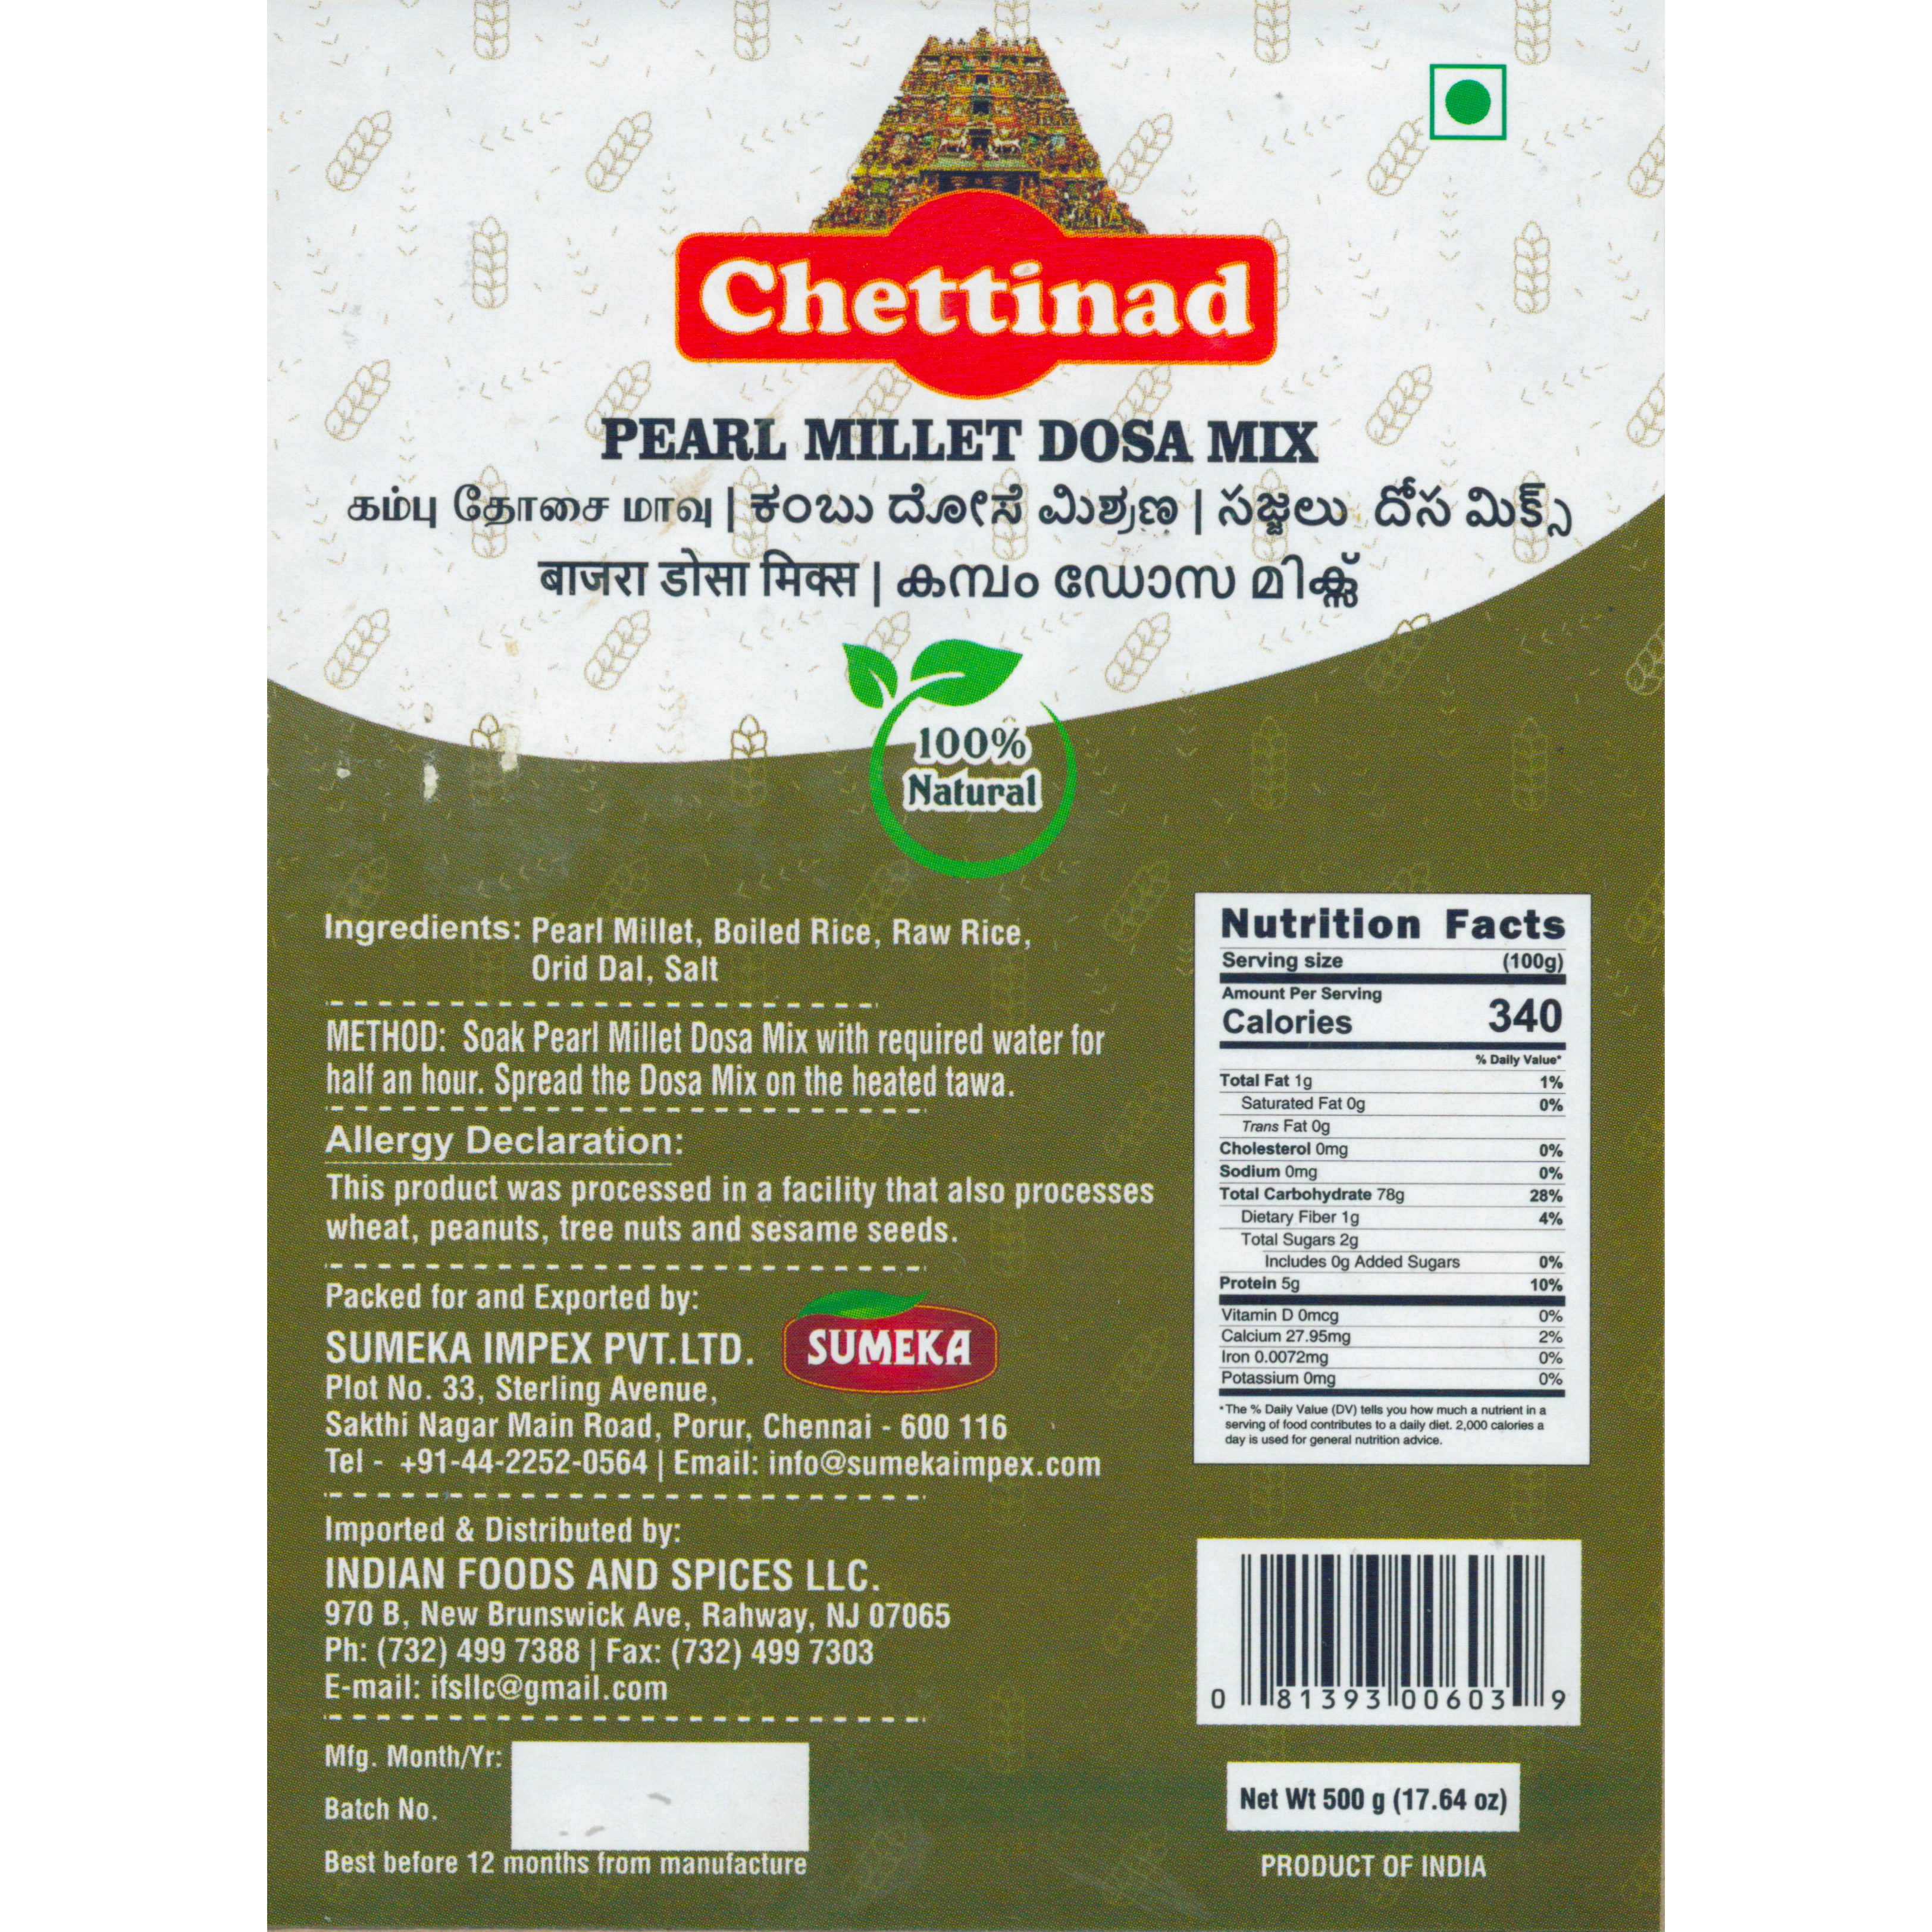 Pack of 3 - Chettinad Pearl Millet Dosa Mix - 500 Gm (1.1 Lb)